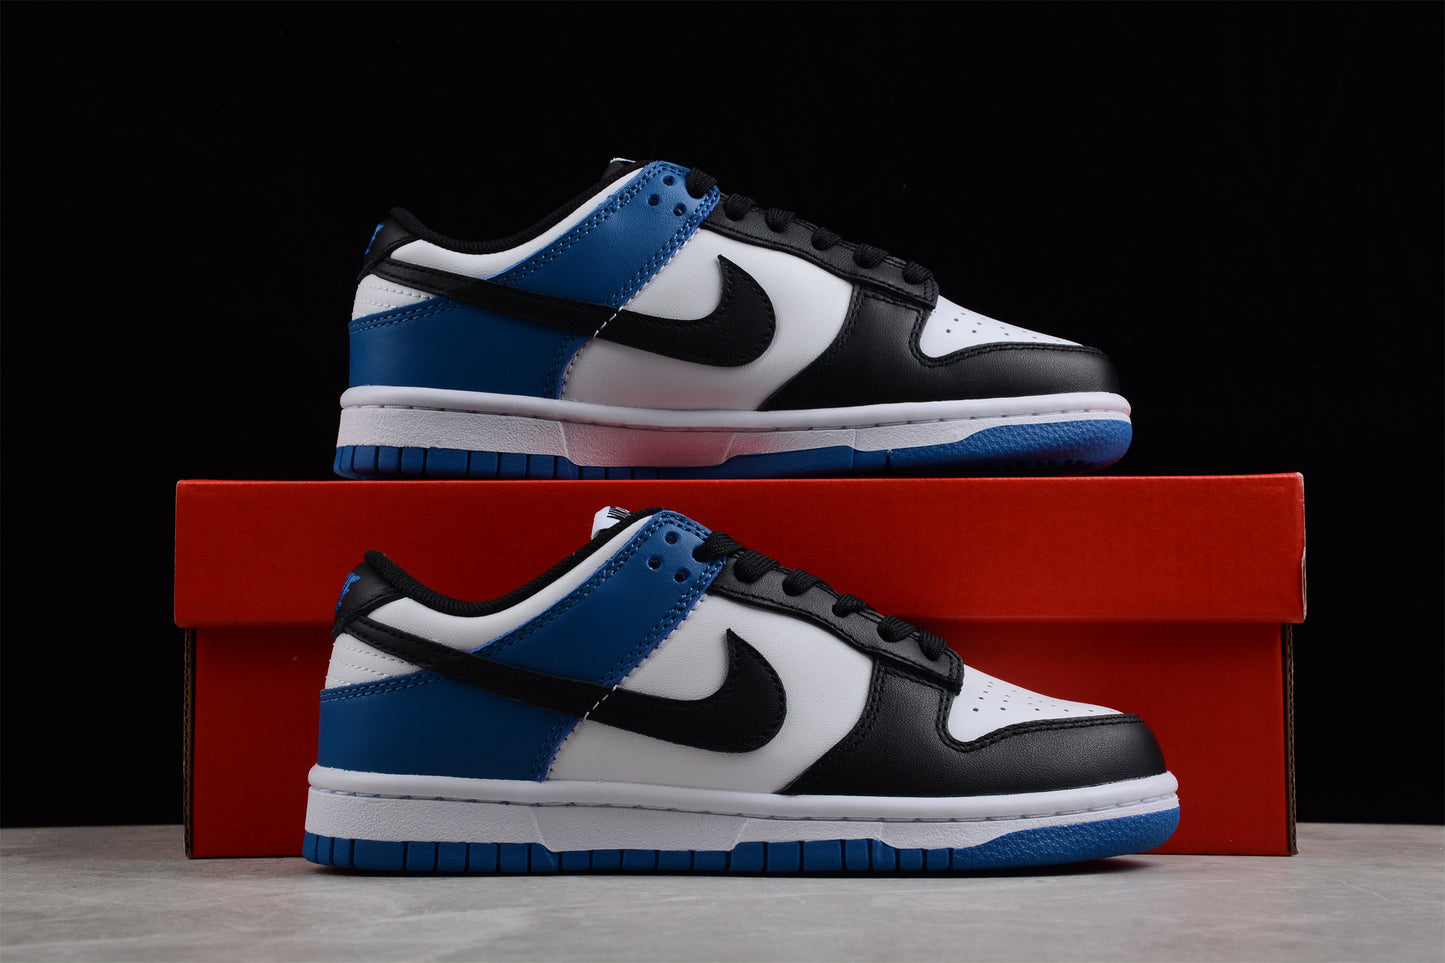 Dunk Low industrial blue